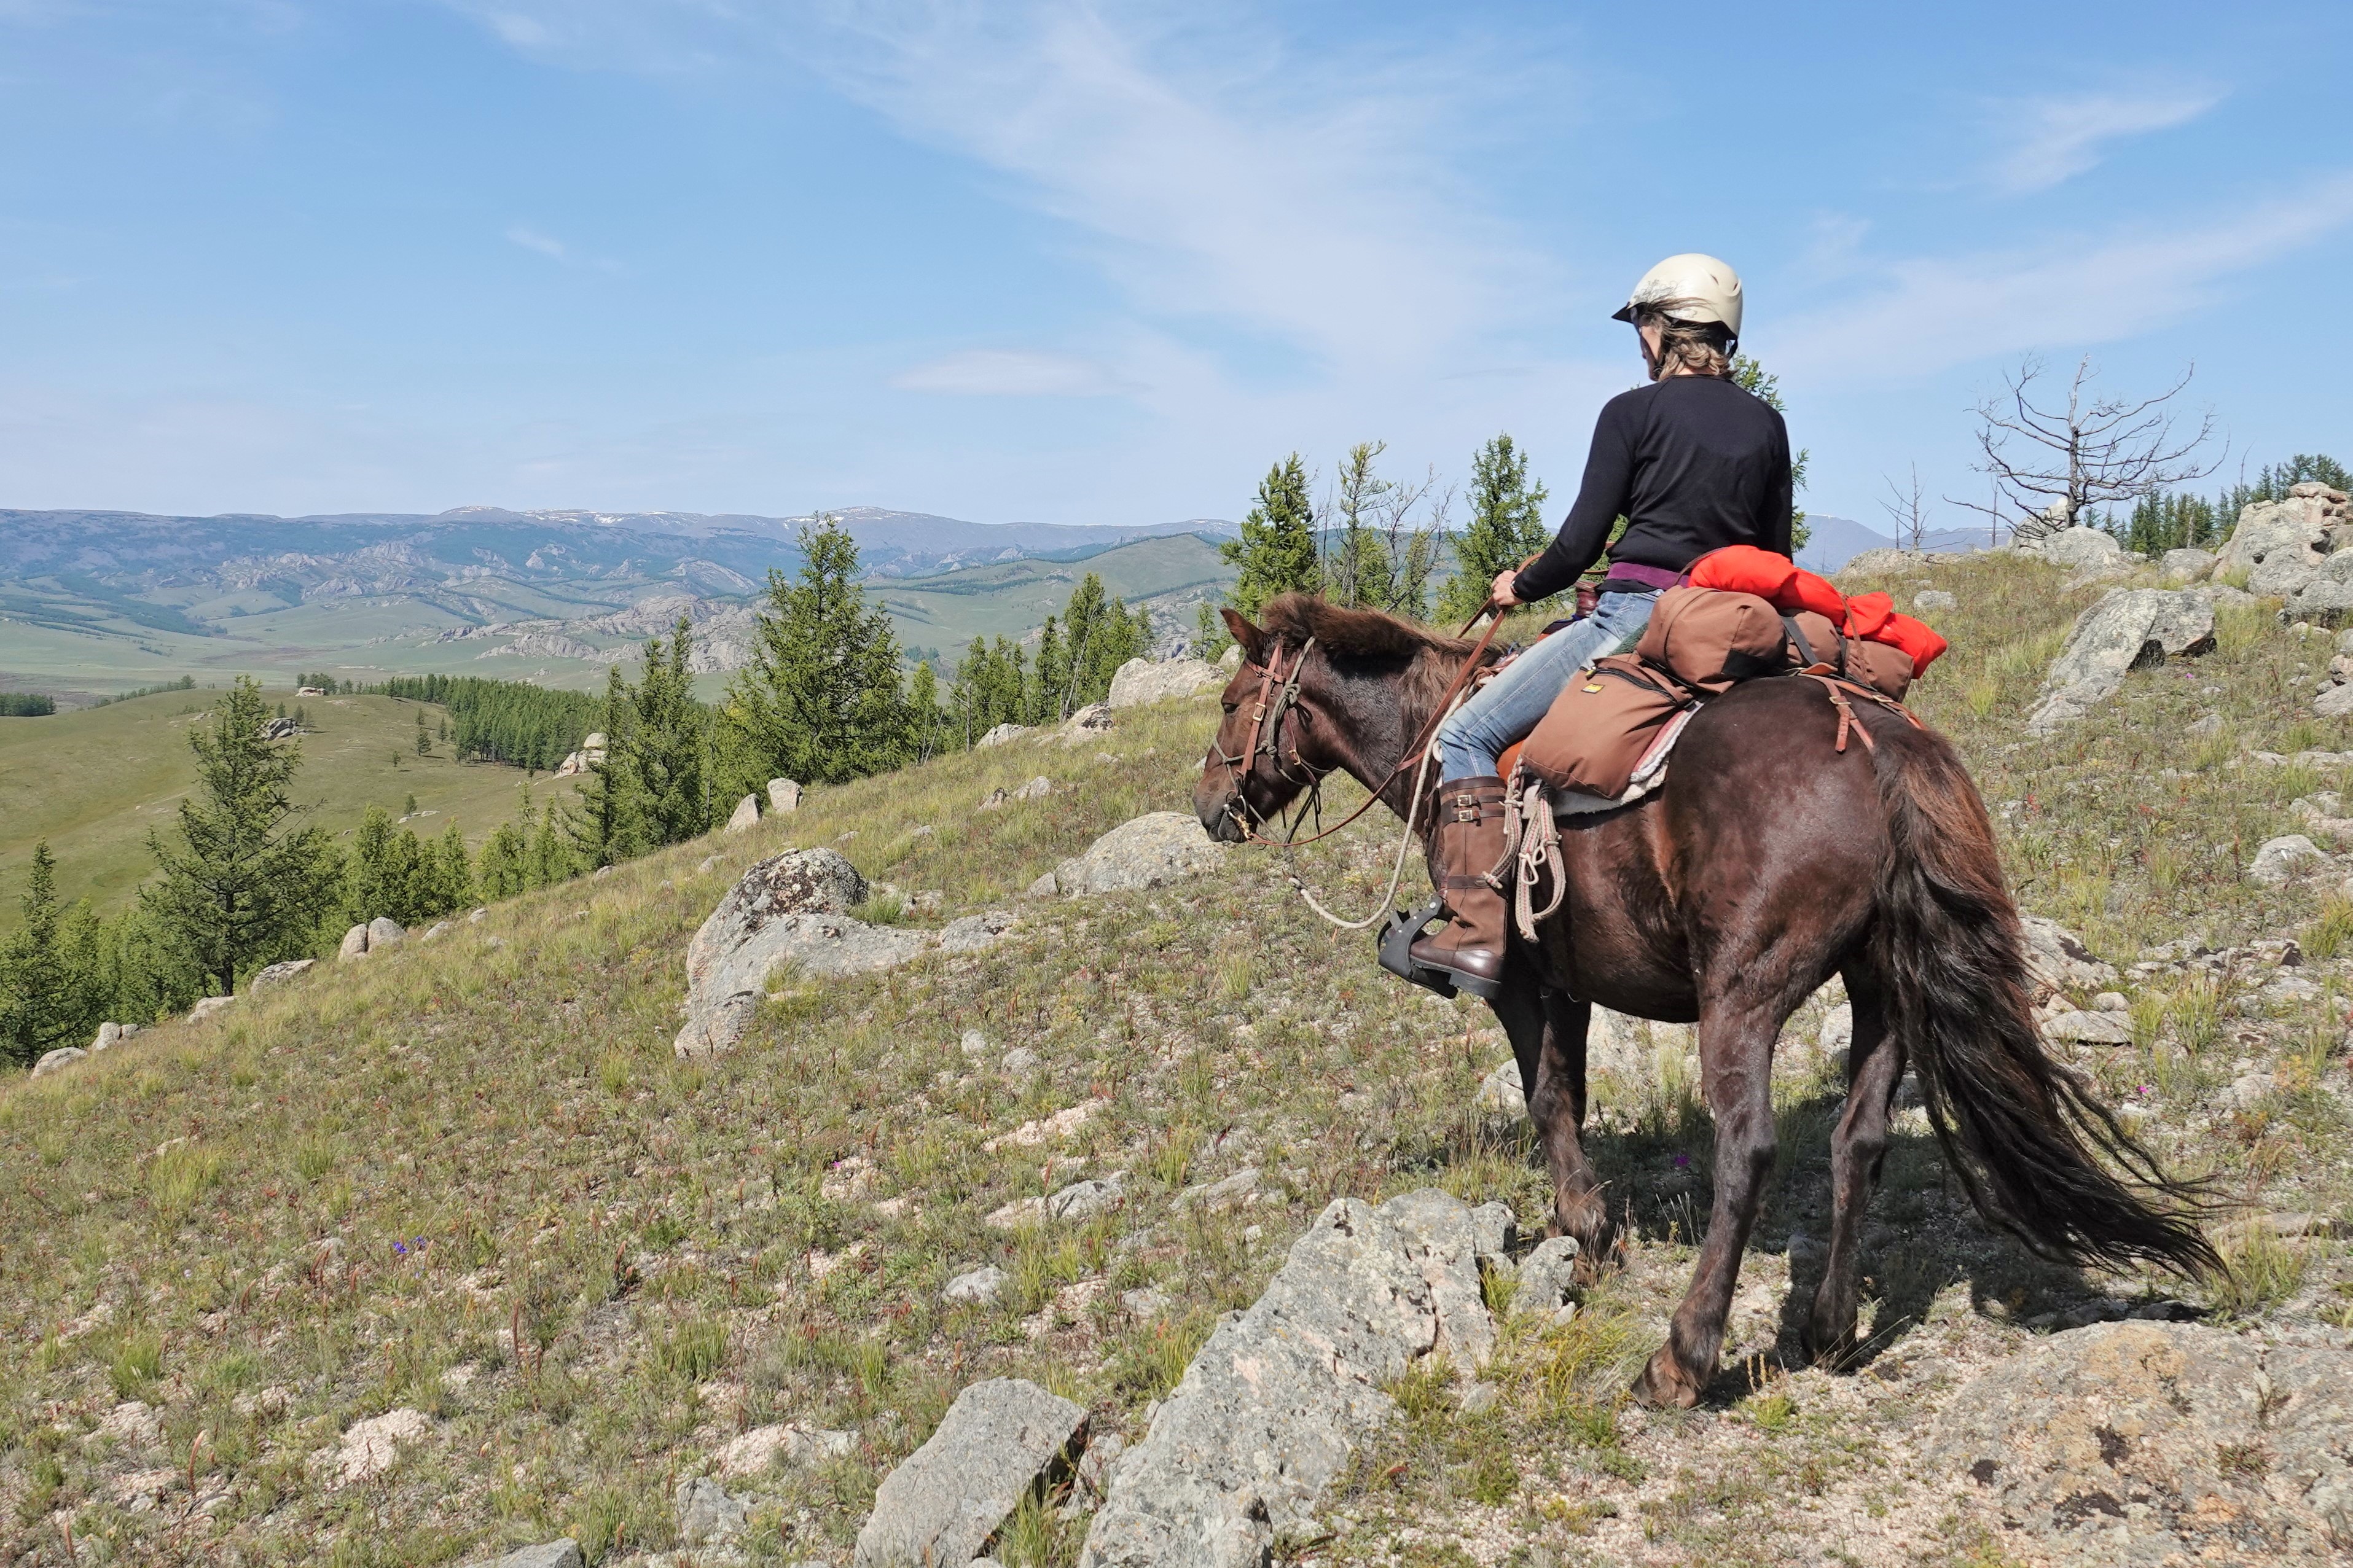 8 Good Reasons to choose Stone Horse Expeditions, Mongolia Horse Trekking